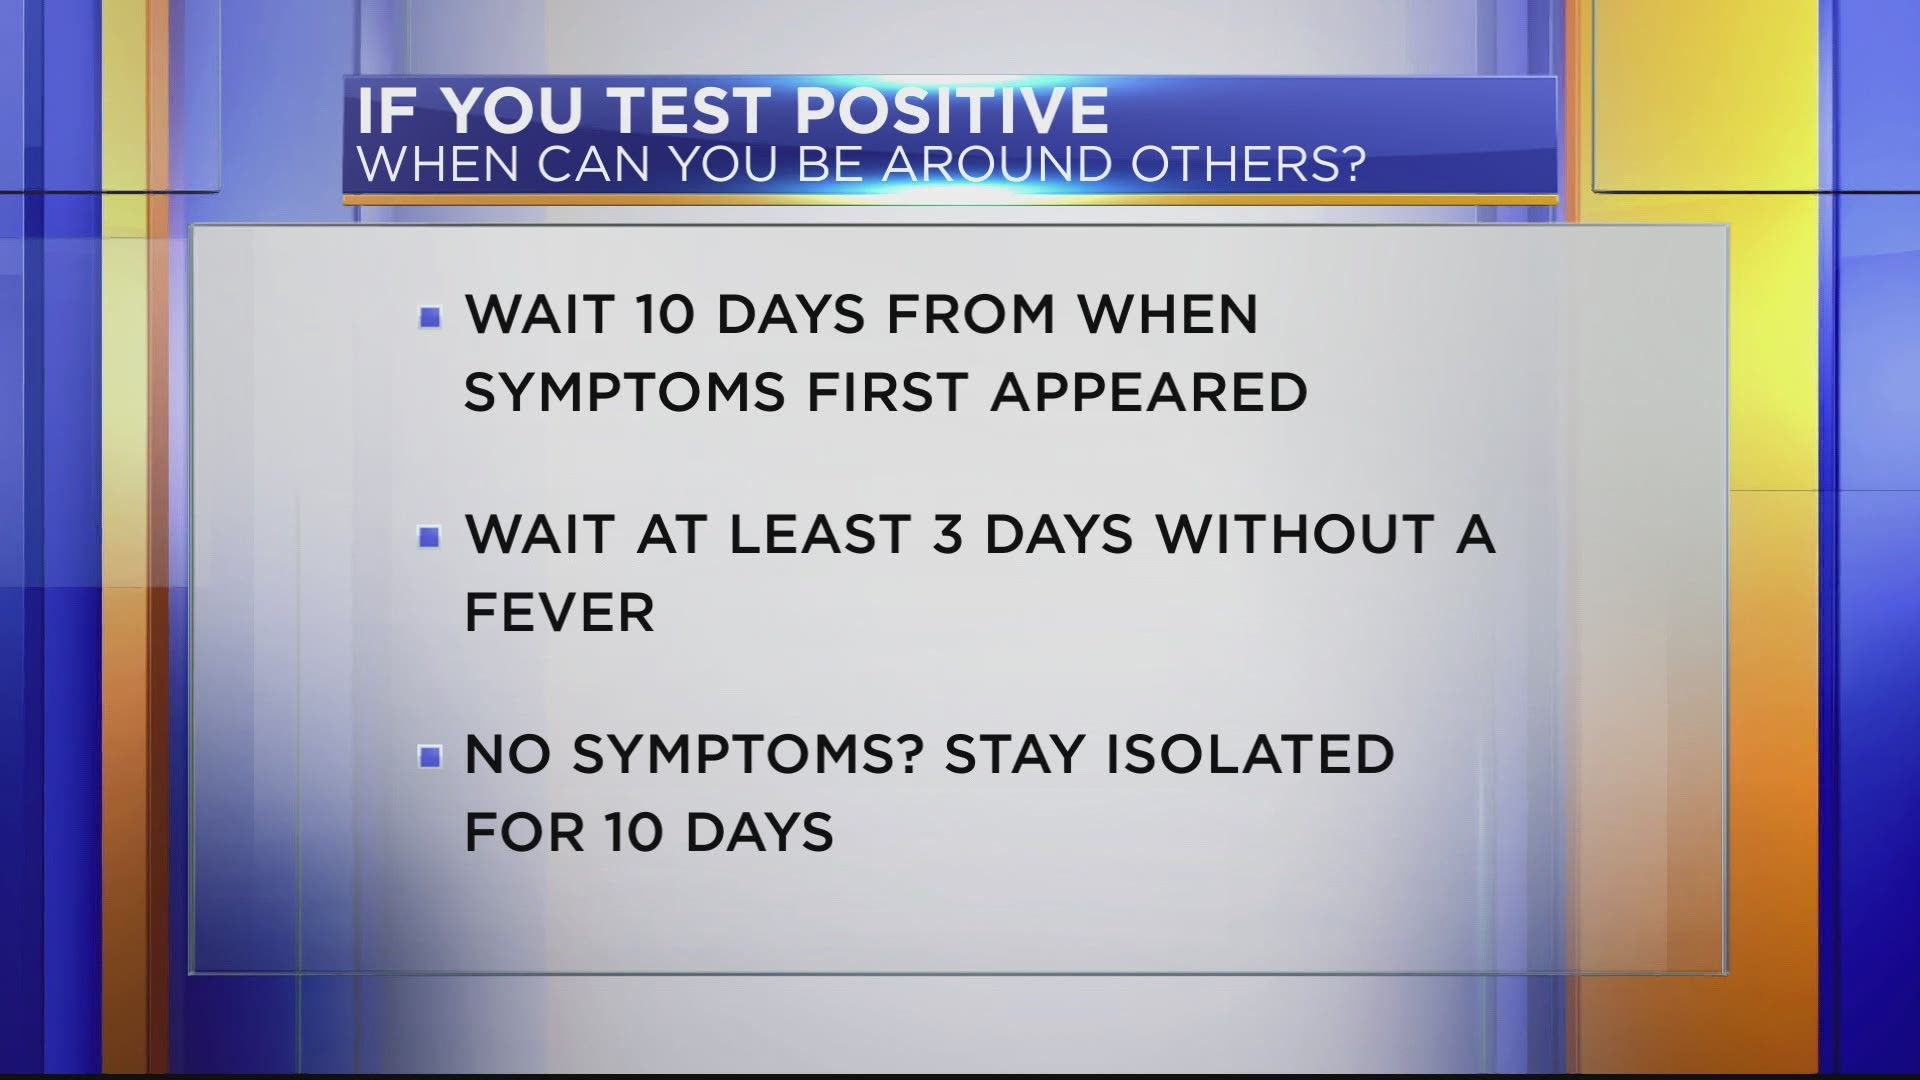 What should you do if you're COVID-19 test comes back positive?